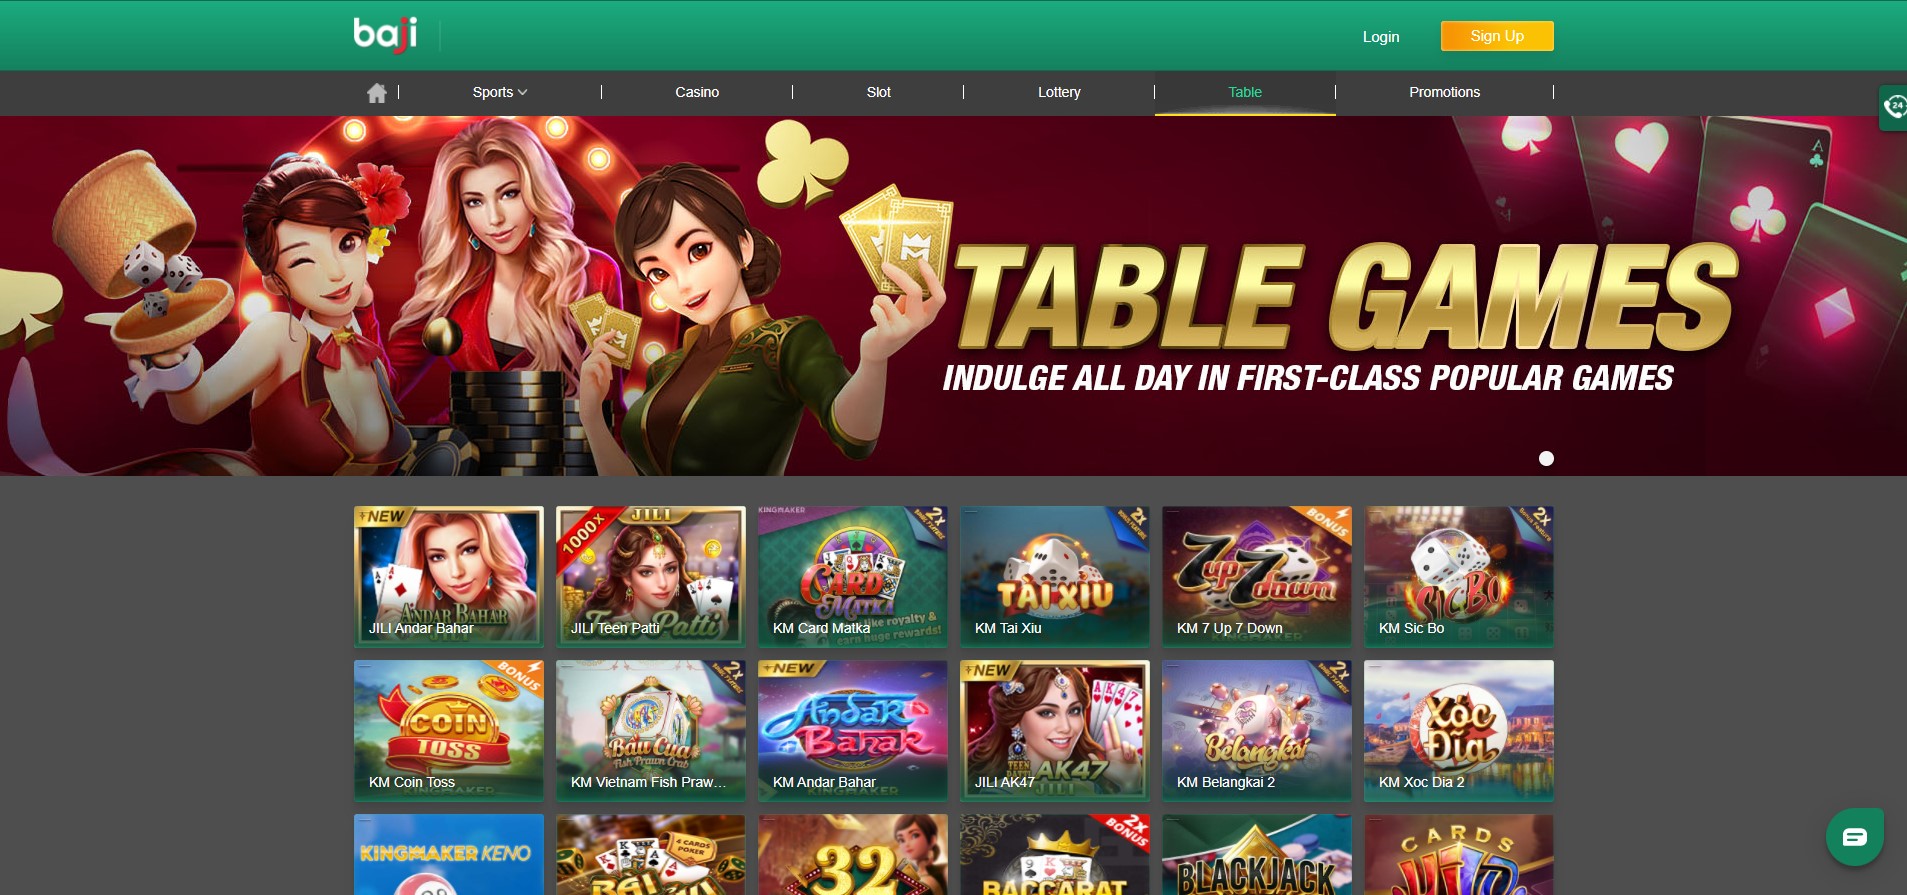 bajilive table games page